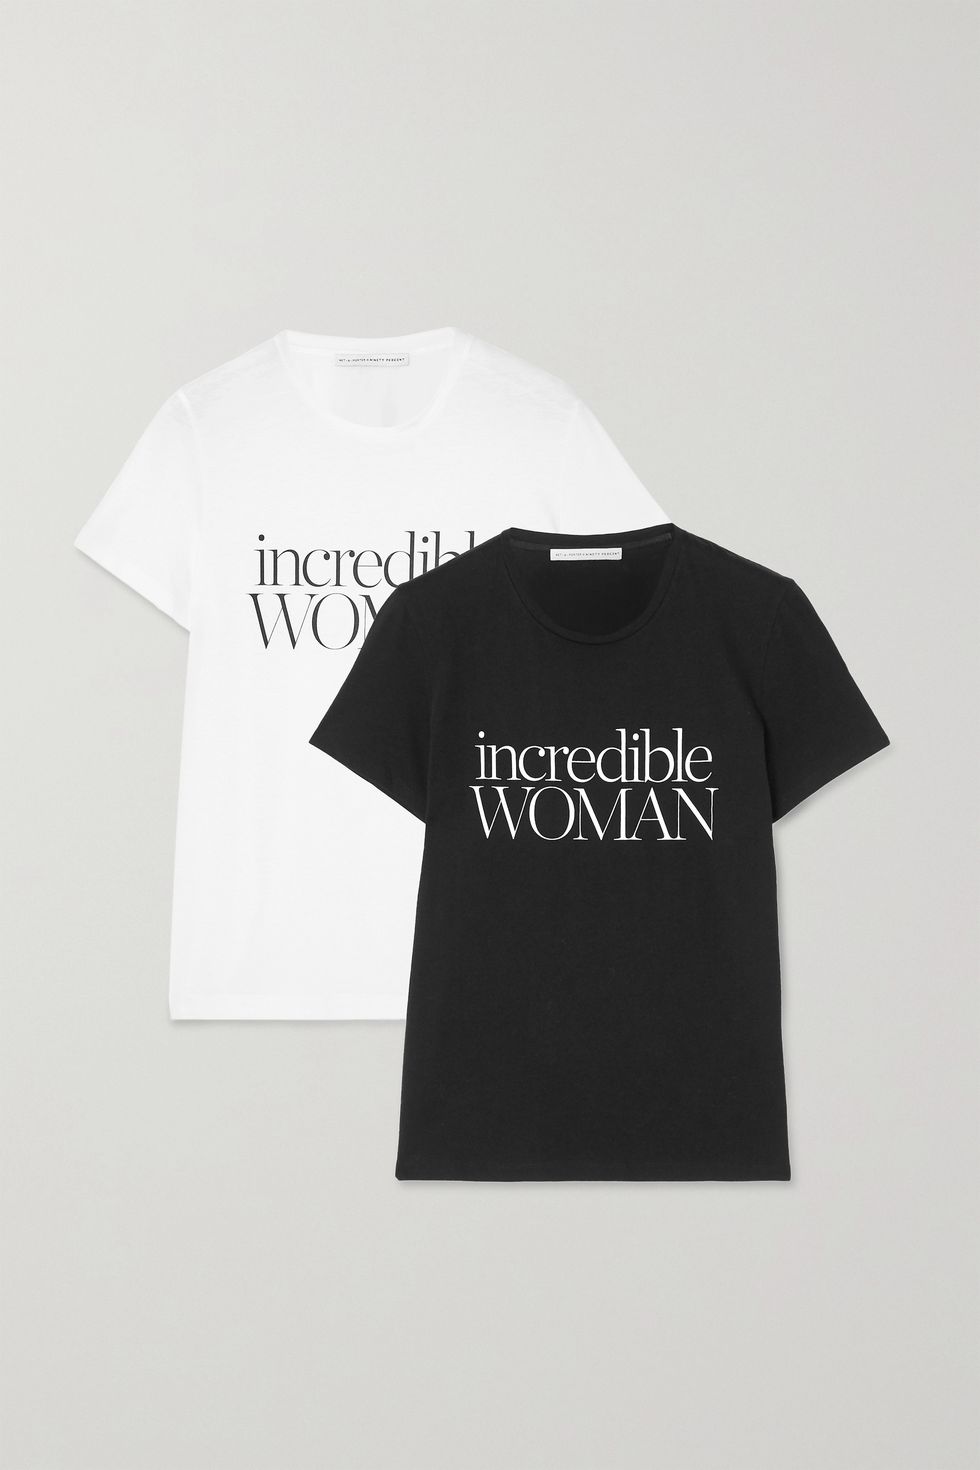 Feminist Gift Ideas - 70 Best Gifts to Celebrate Feminism